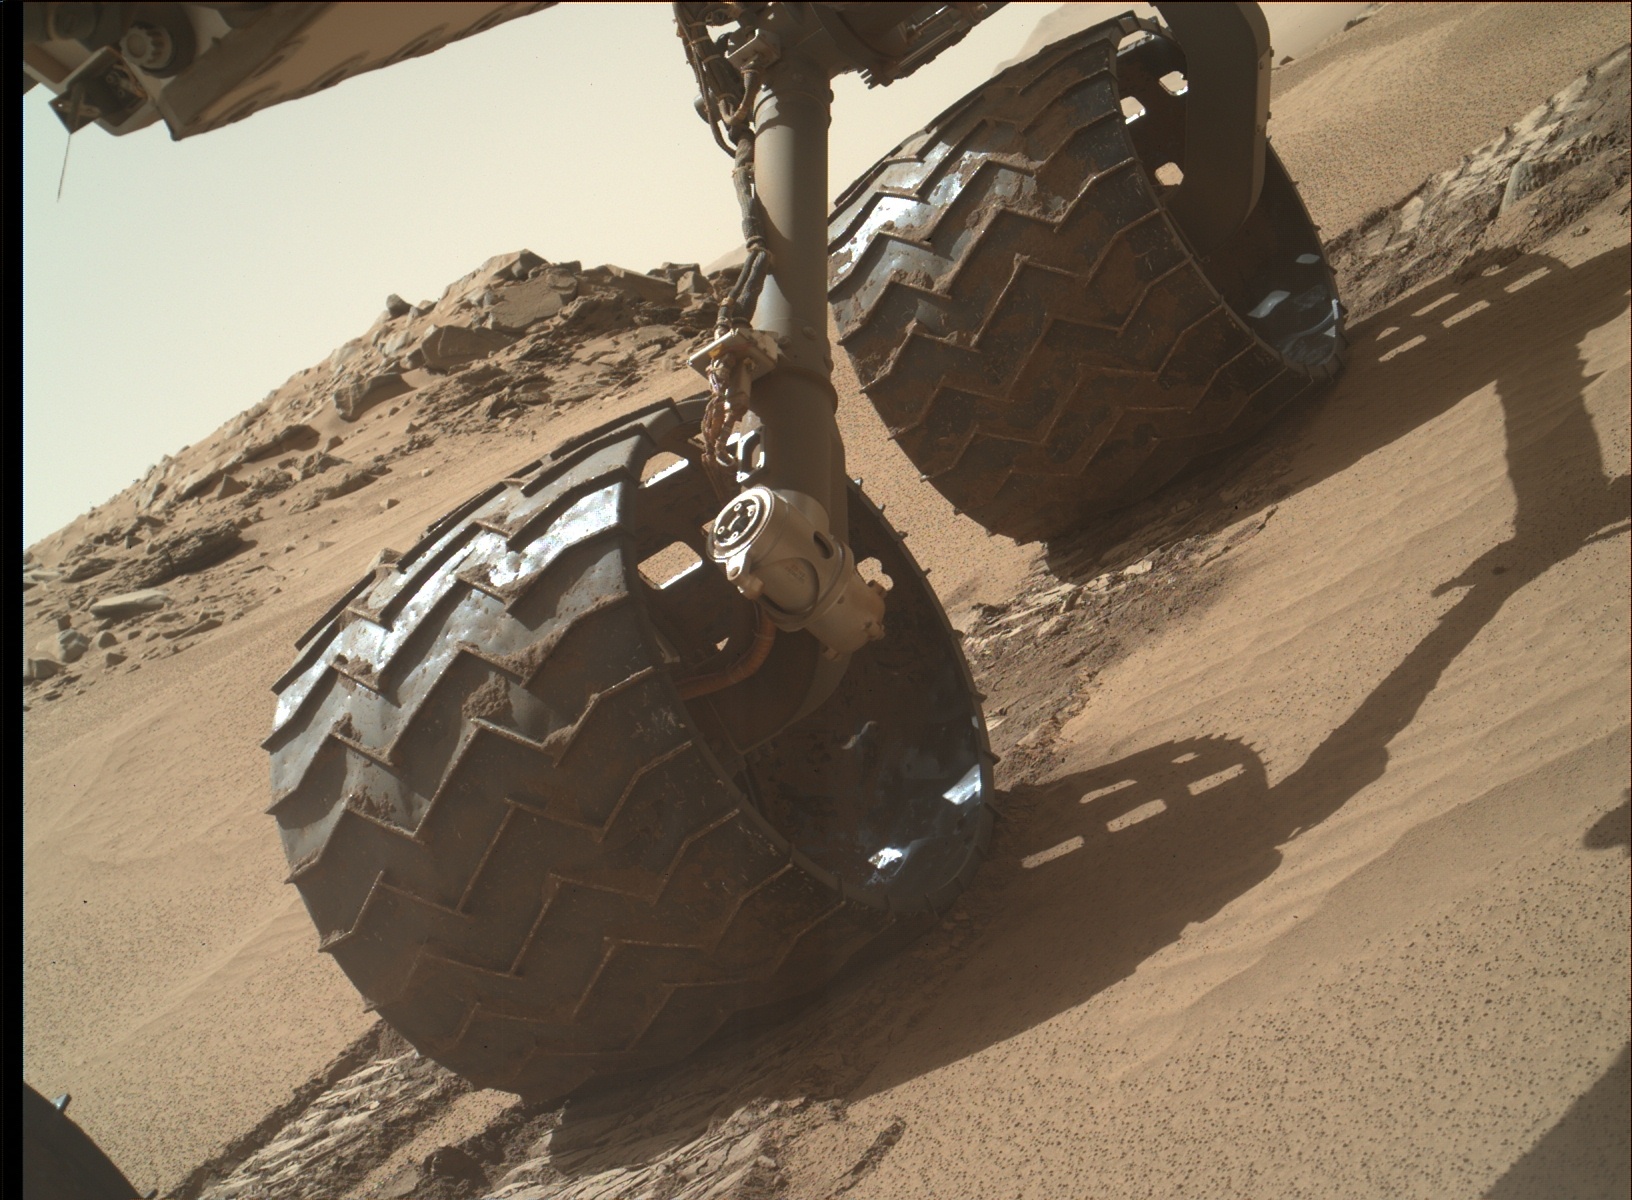 Nasa's Mars rover Curiosity acquired this image using its Mars Hand Lens Imager (MAHLI) on Sol 532, at drive 190, site number 26